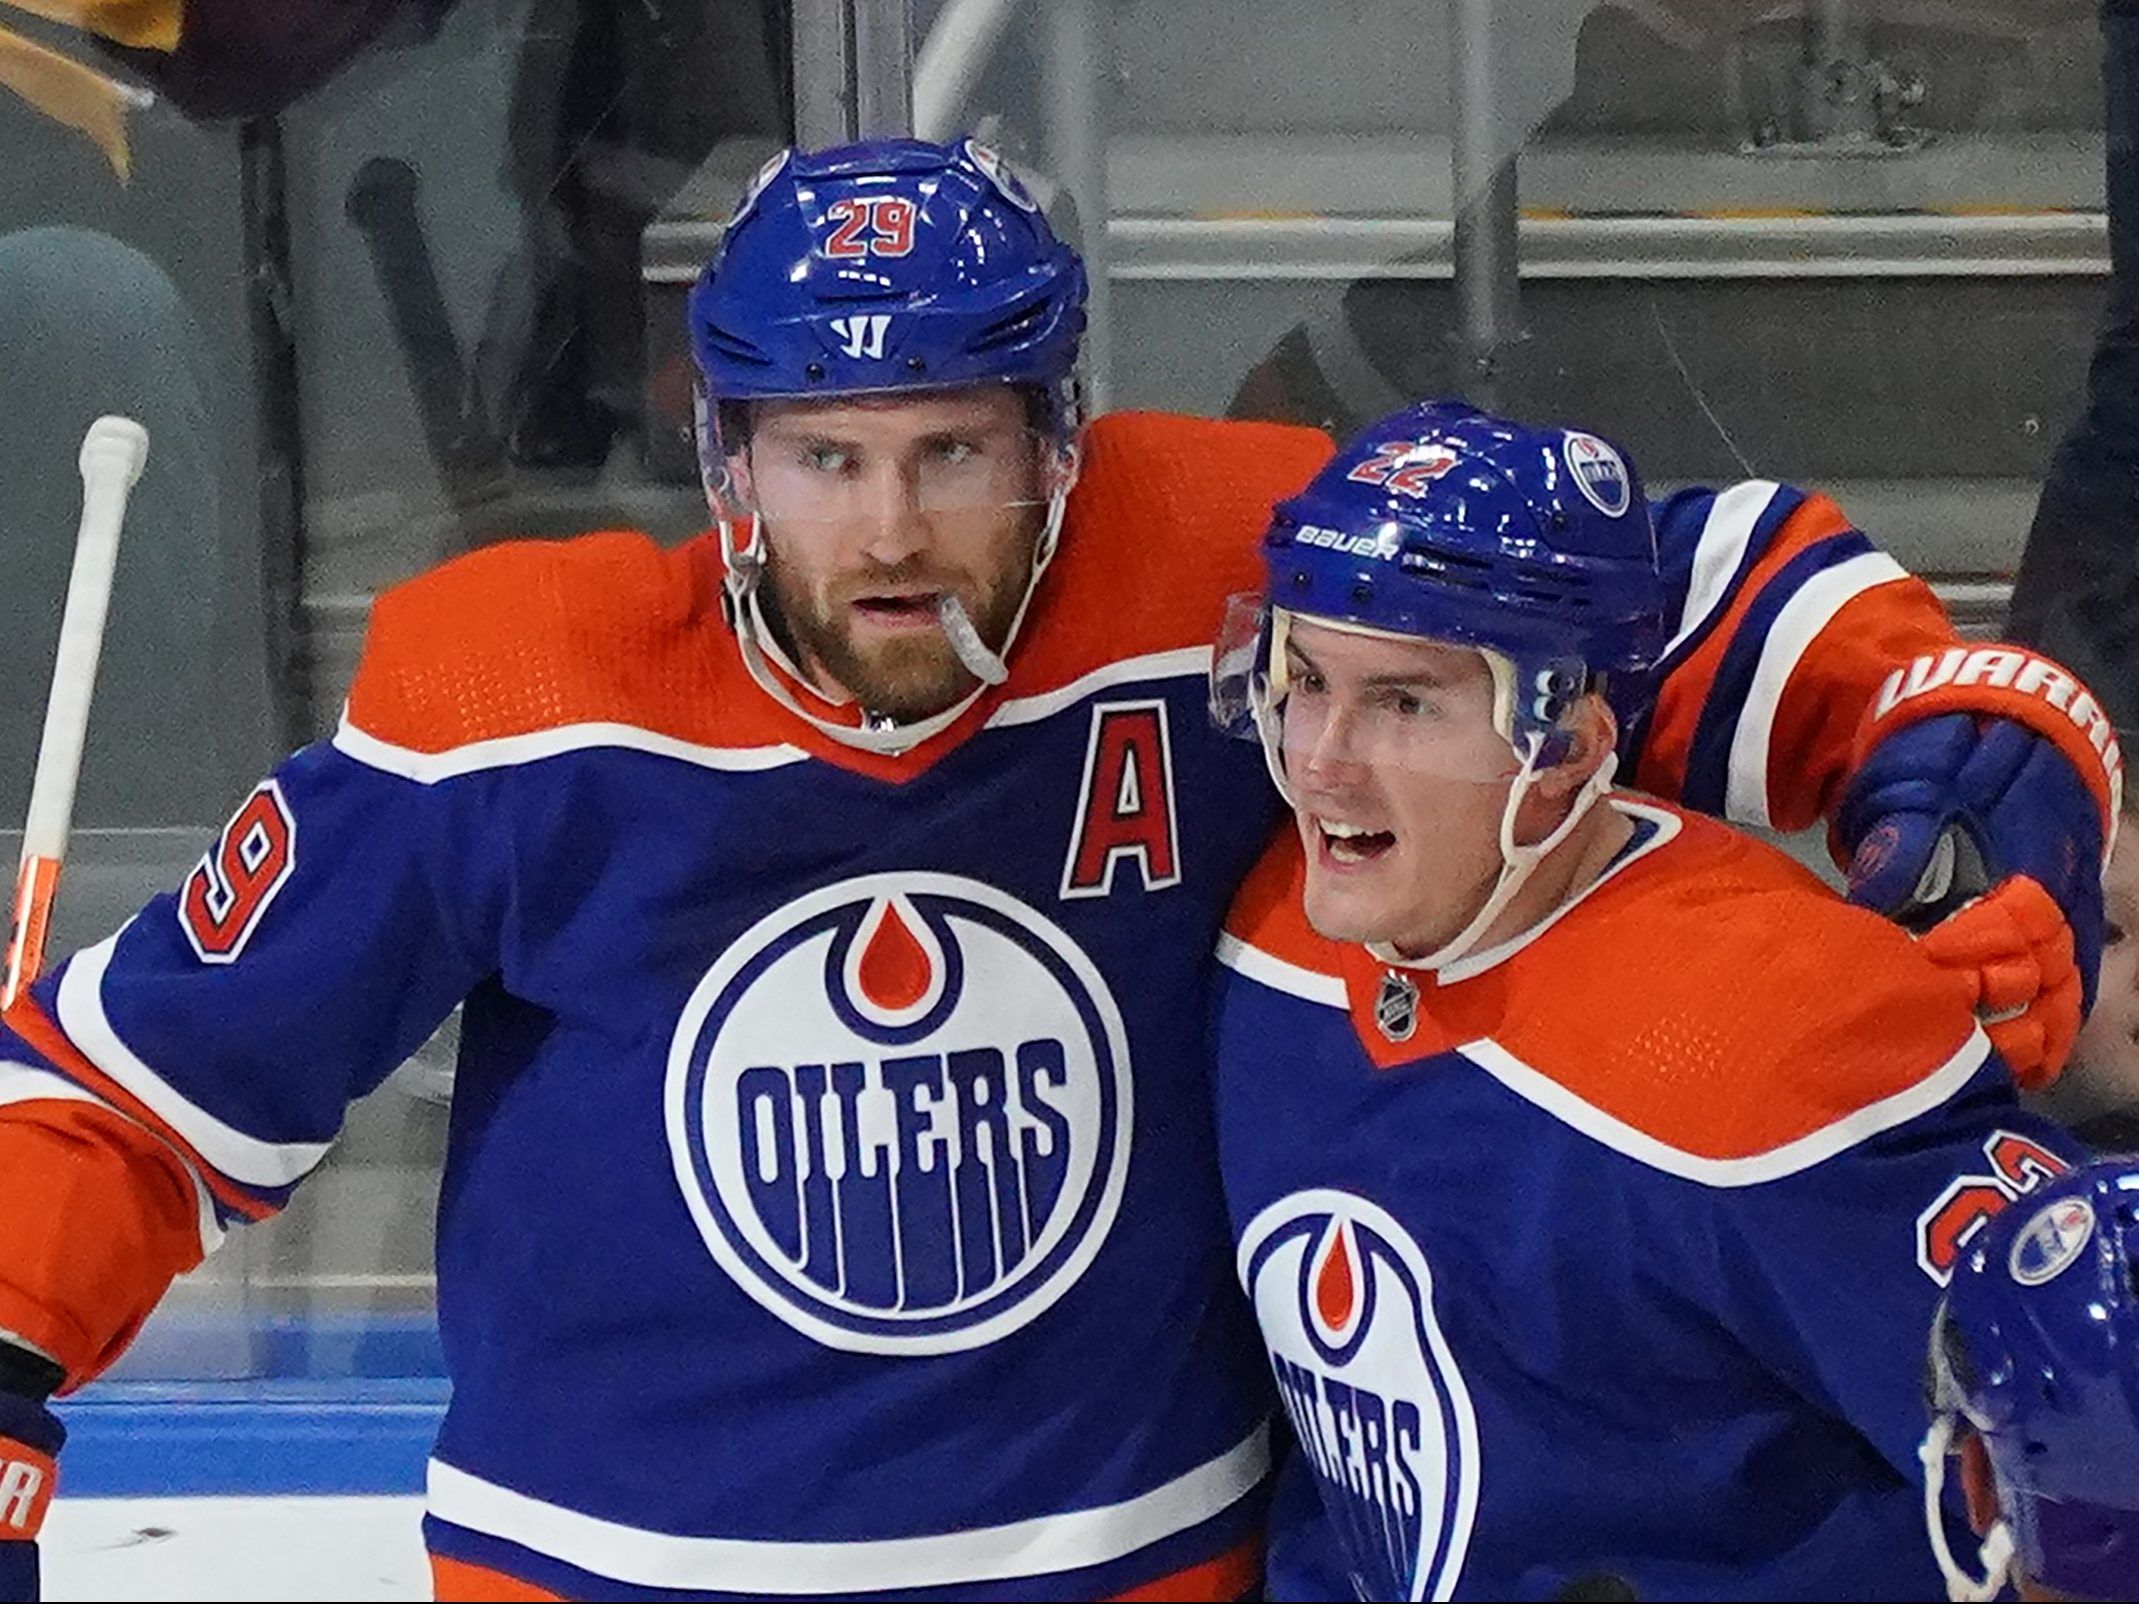 Oilers vs Stars Odds, Picks, and Predictions Tonight Barrie Continues